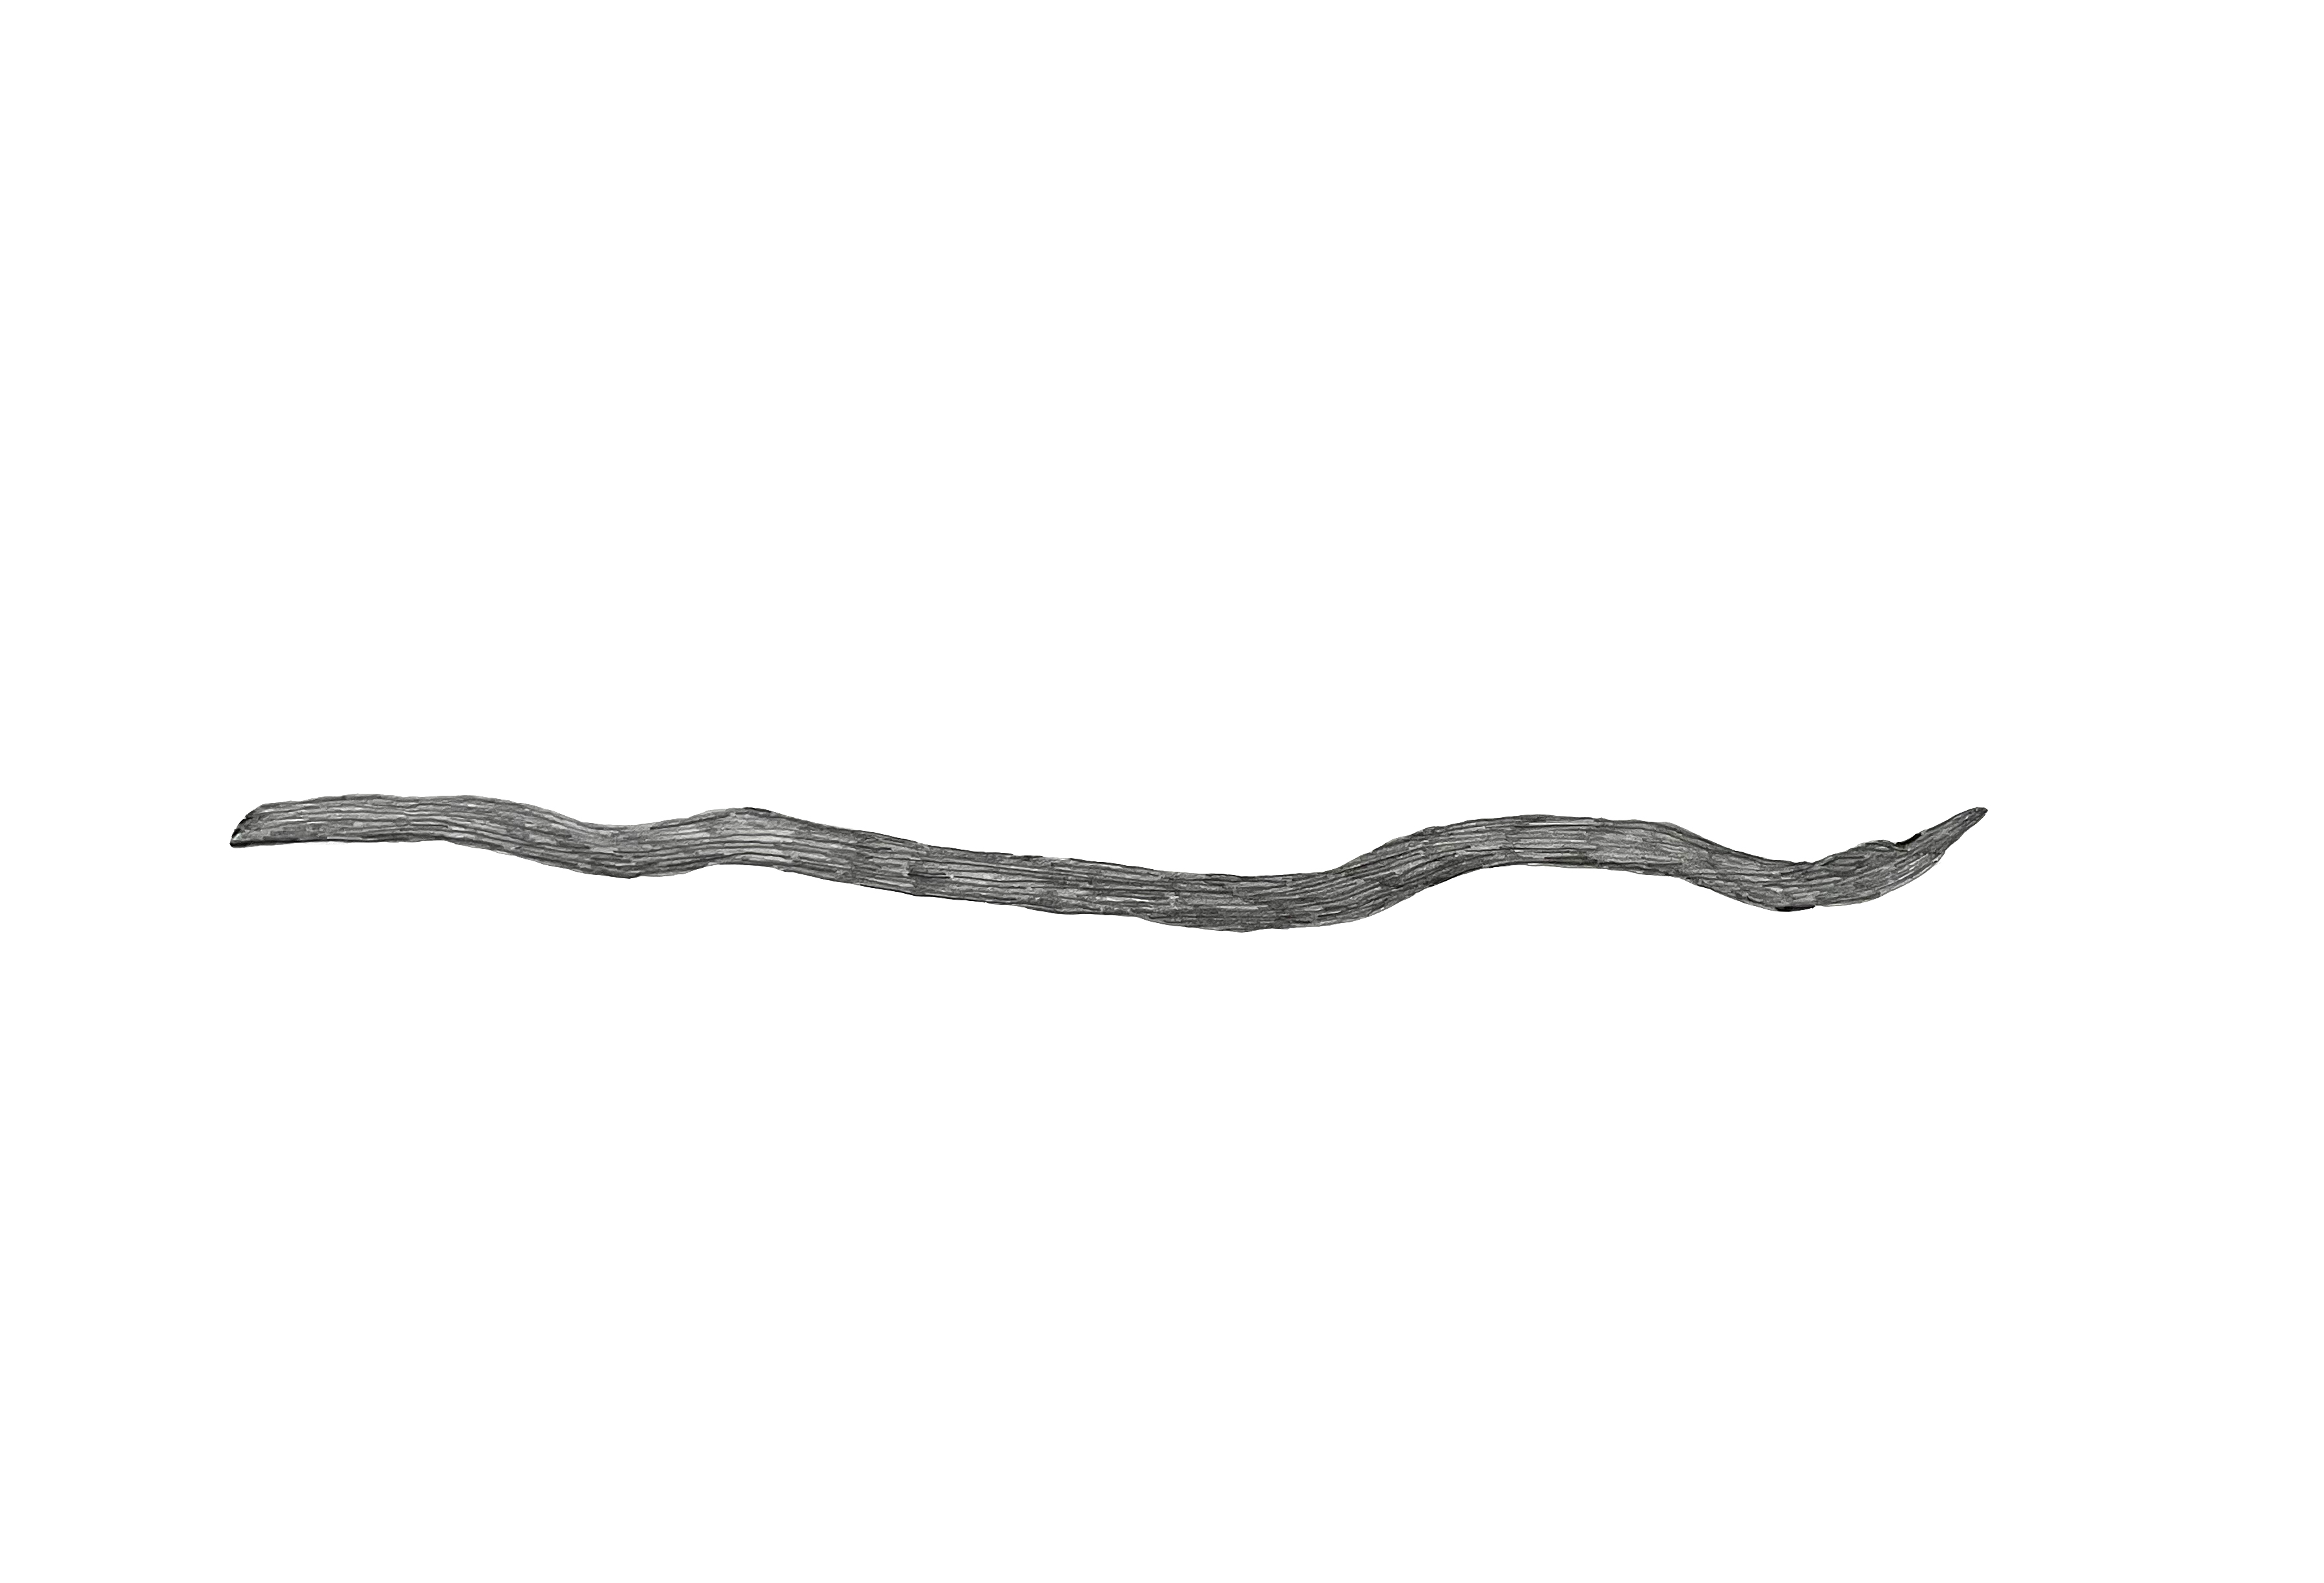 a squiggly stick drawn in pencil on a white background